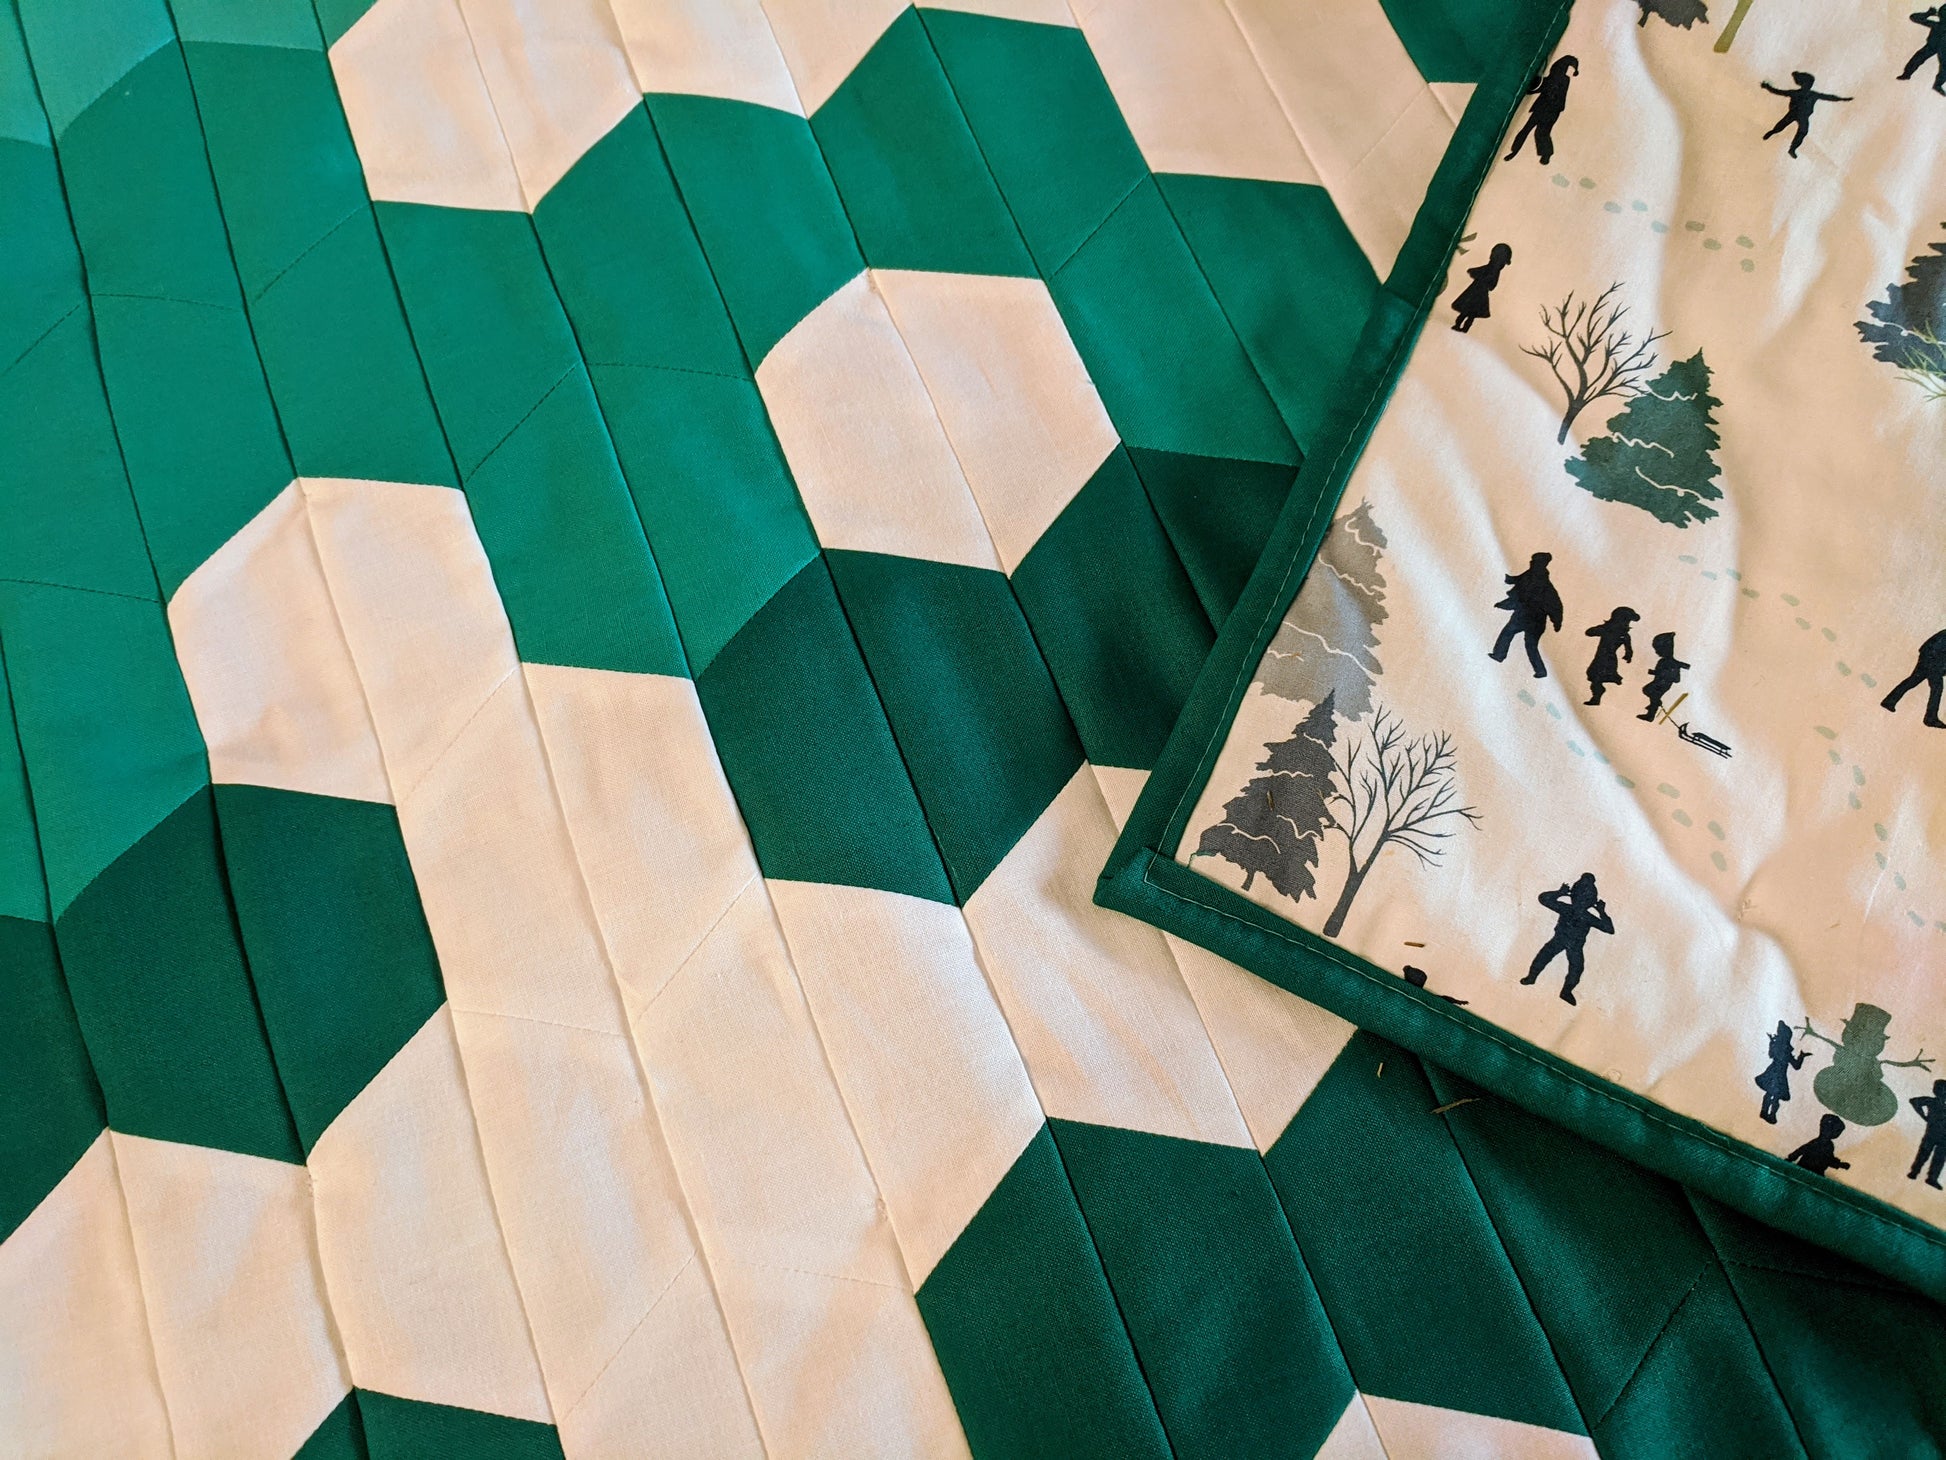 Green and white snowflake quilt with kids sledding on backing.